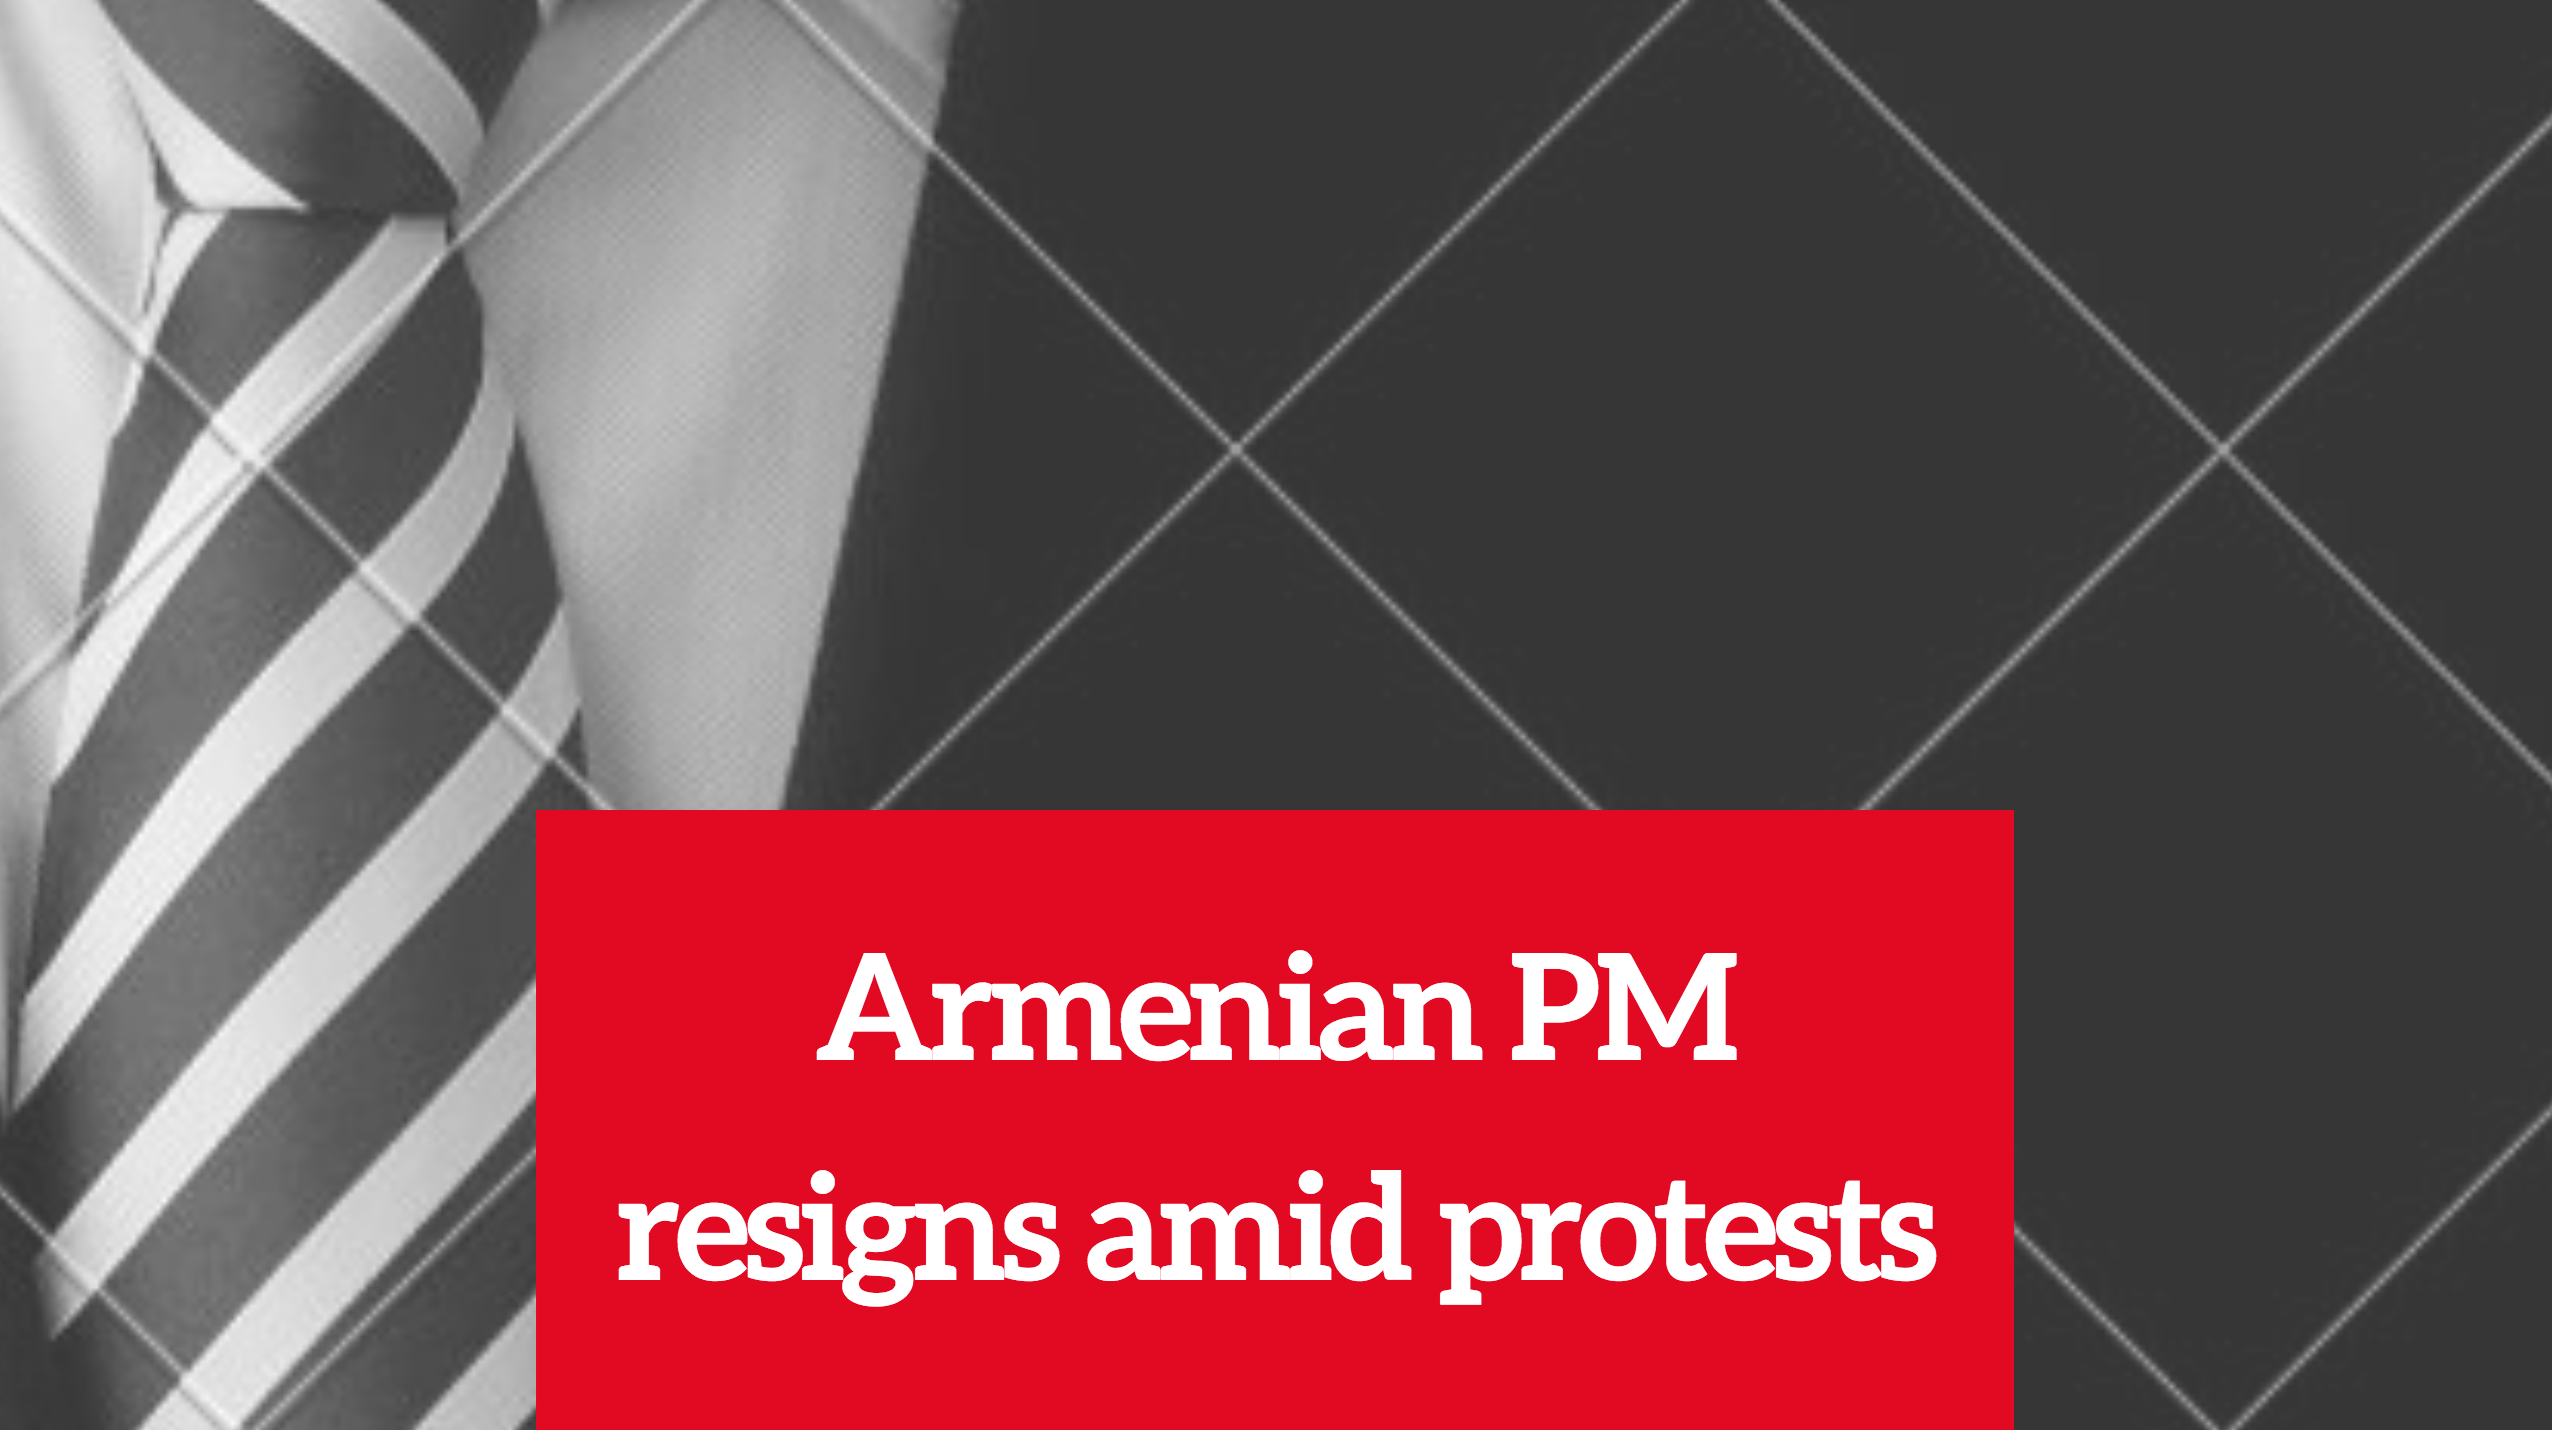 Armenian prime minister resigns amid protests